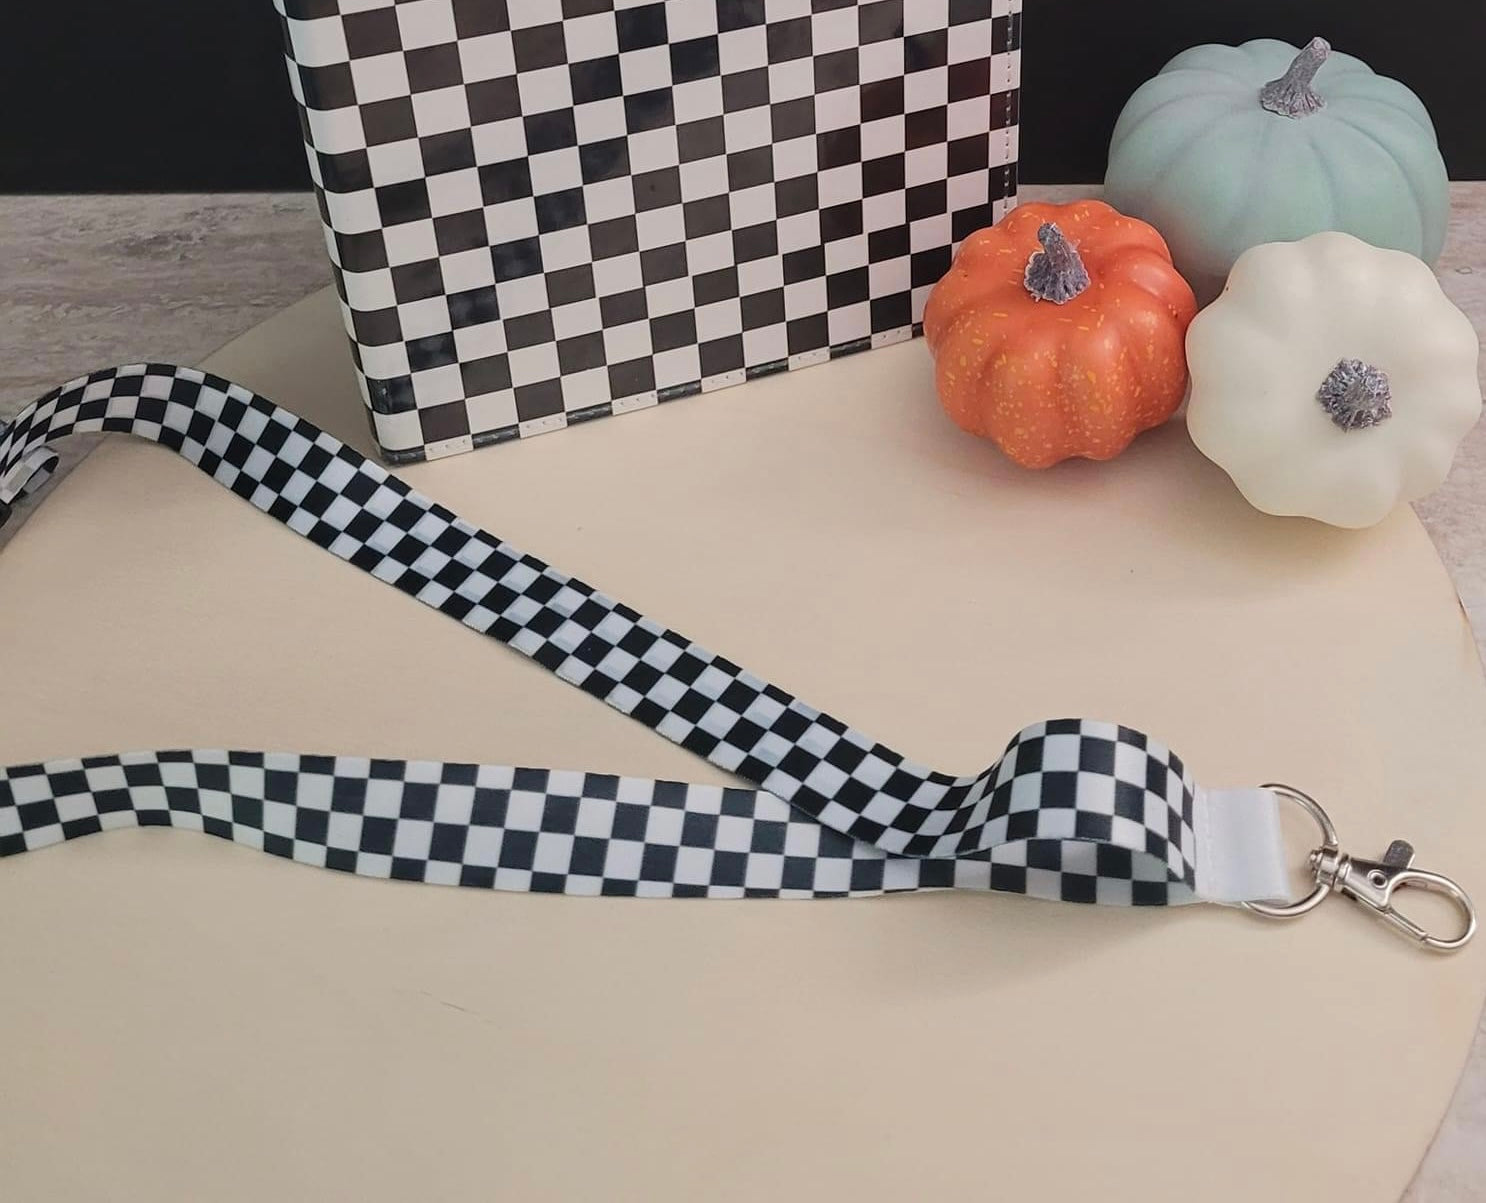 Sublimation Polyester Lanyards - LYD02